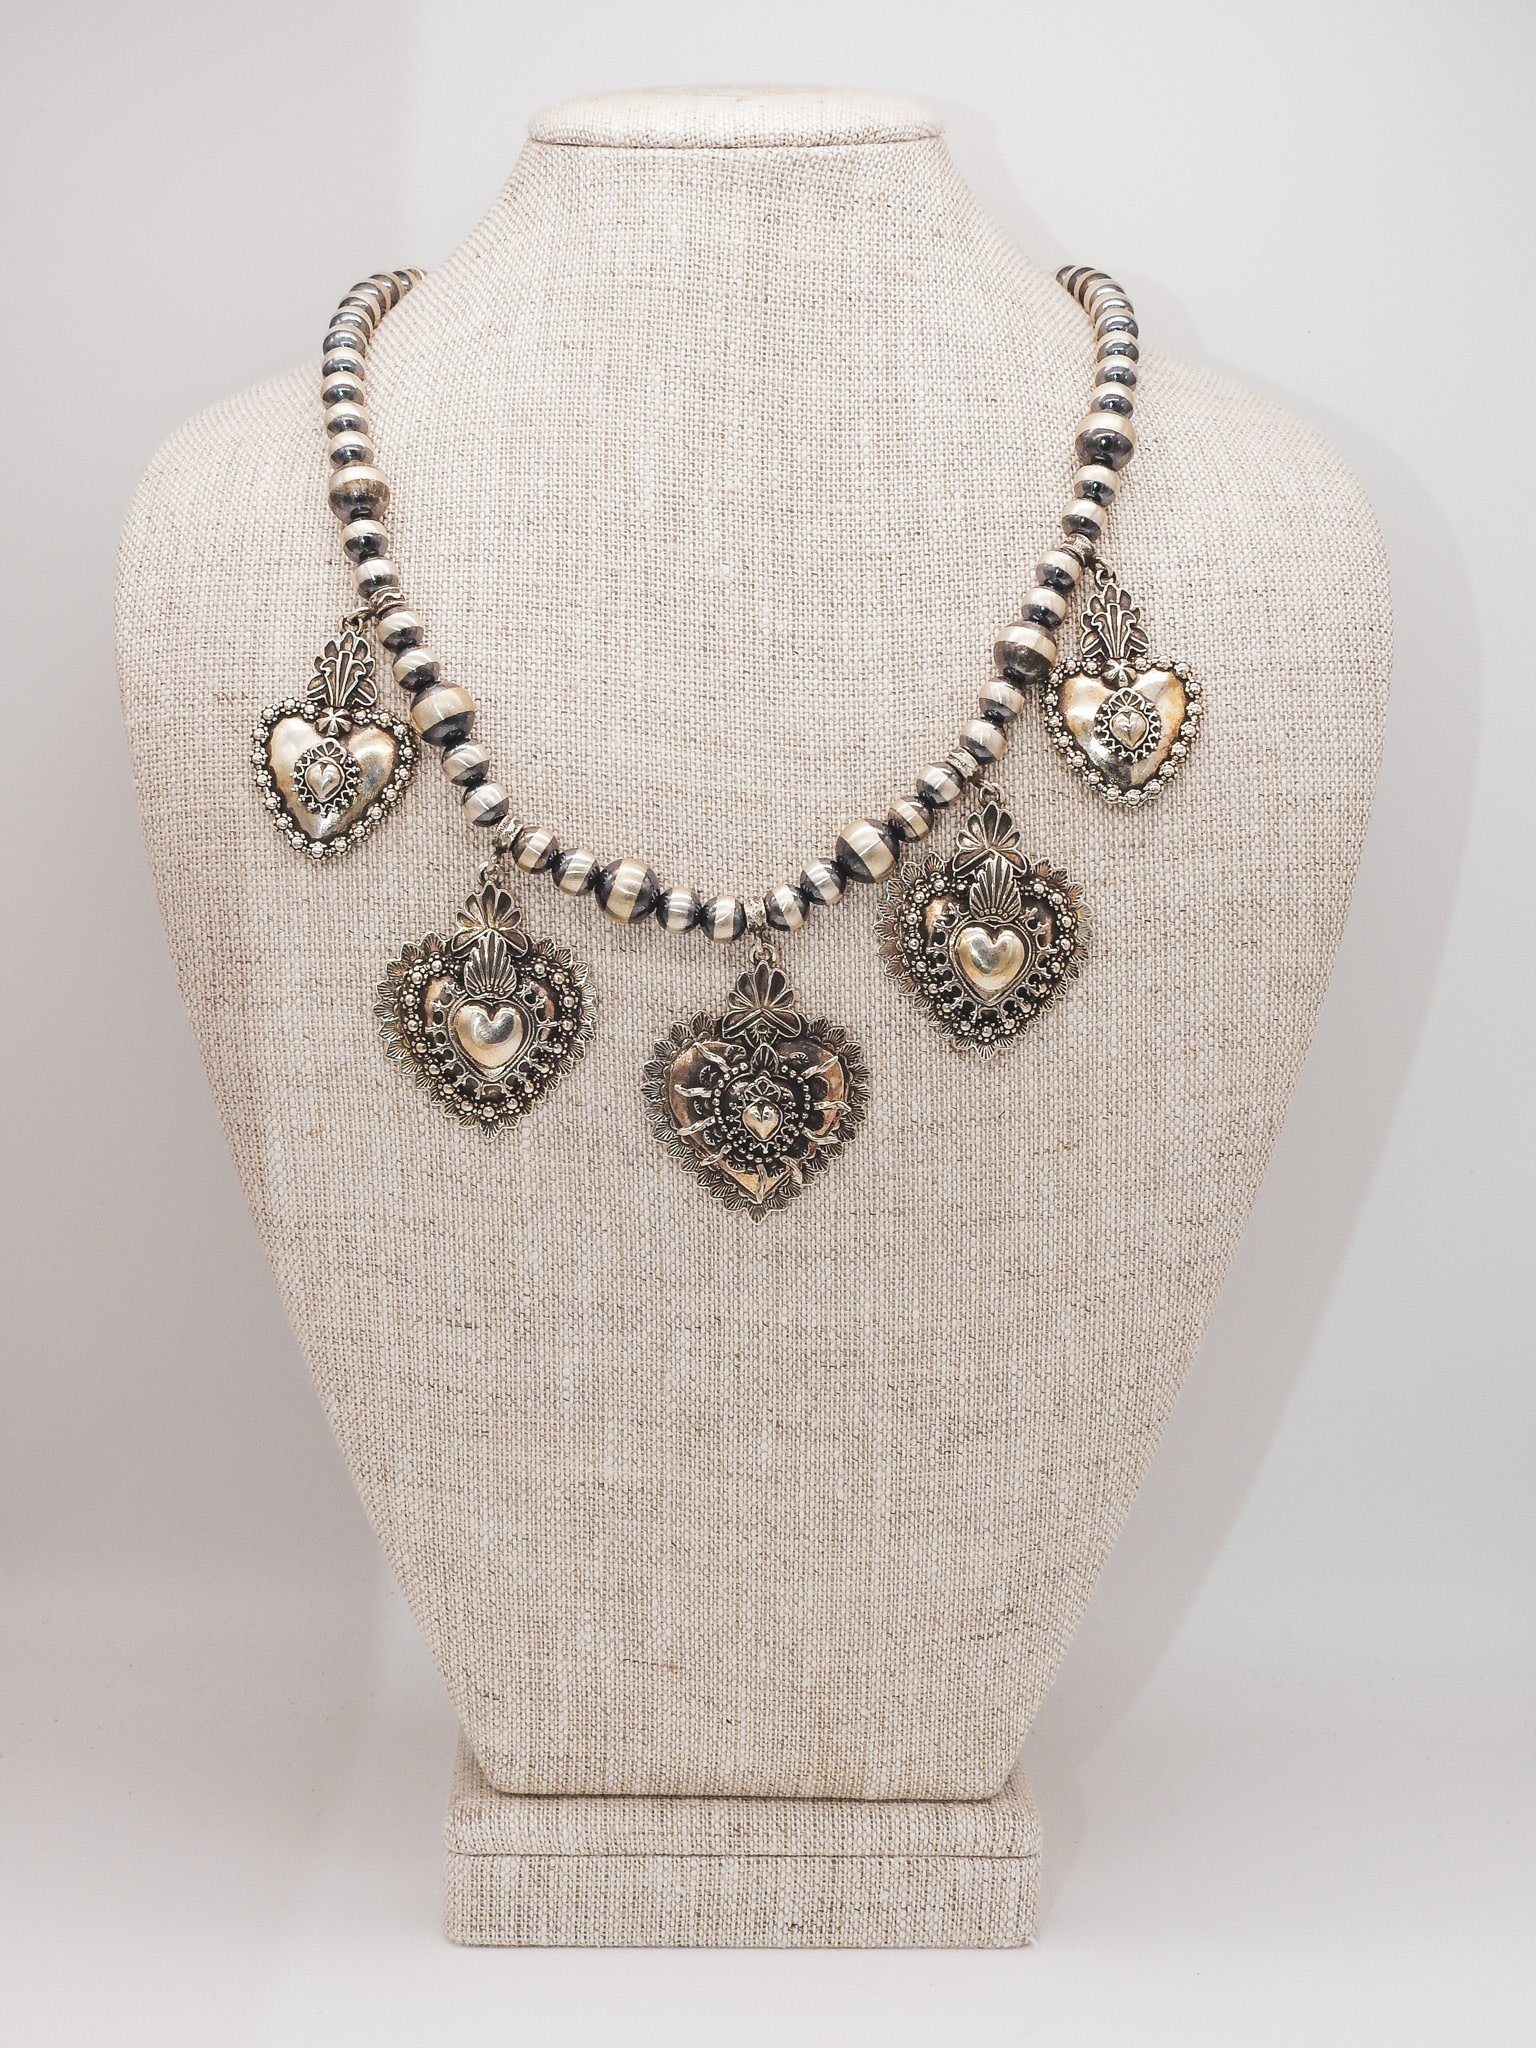 Gregory Segura 5 Heart Stacked Necklace by G. Segura